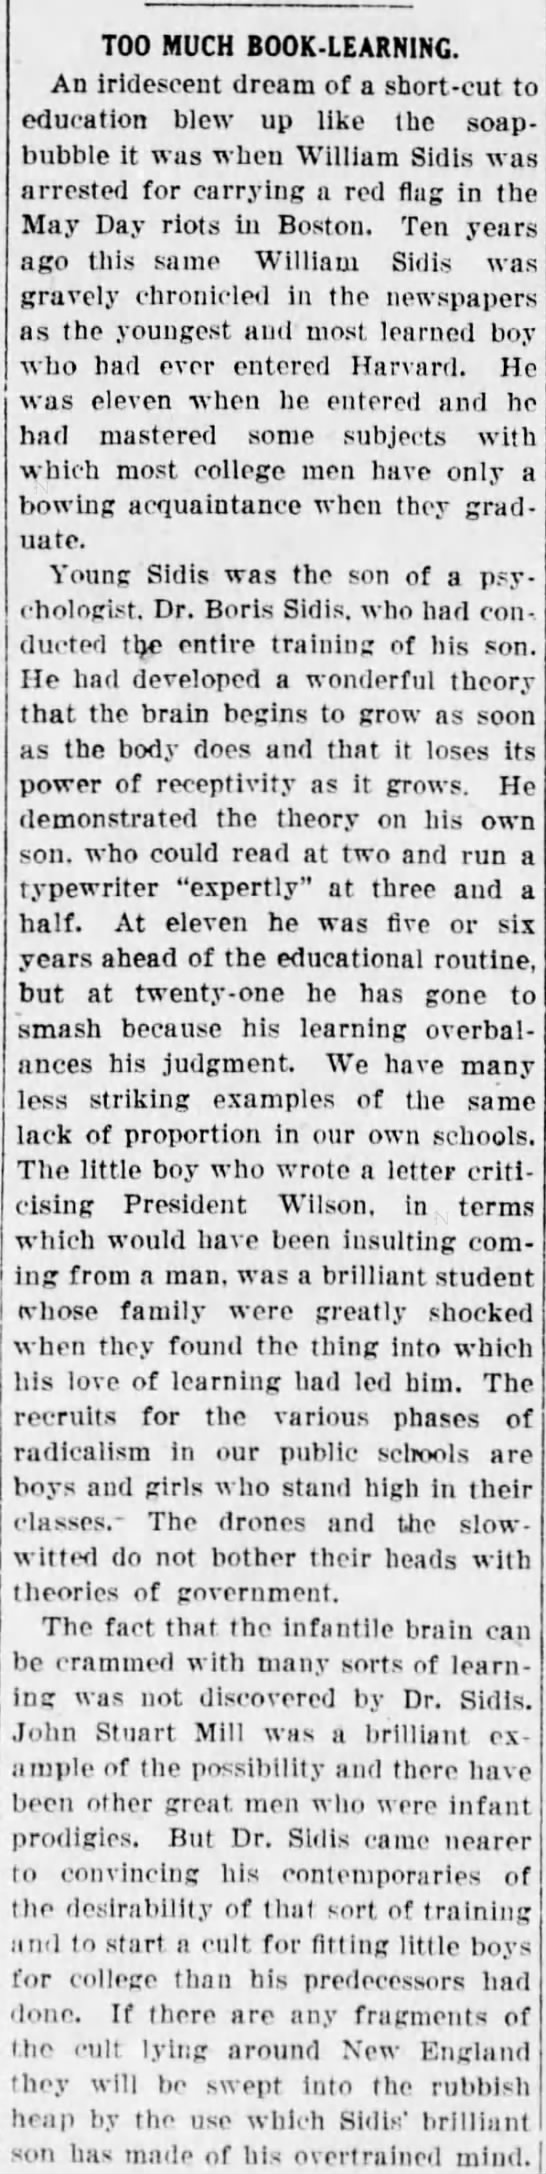 · Old Print Articles: William James Sidis, Prodigy Brooklyn  Daily Eagle (1910/44)